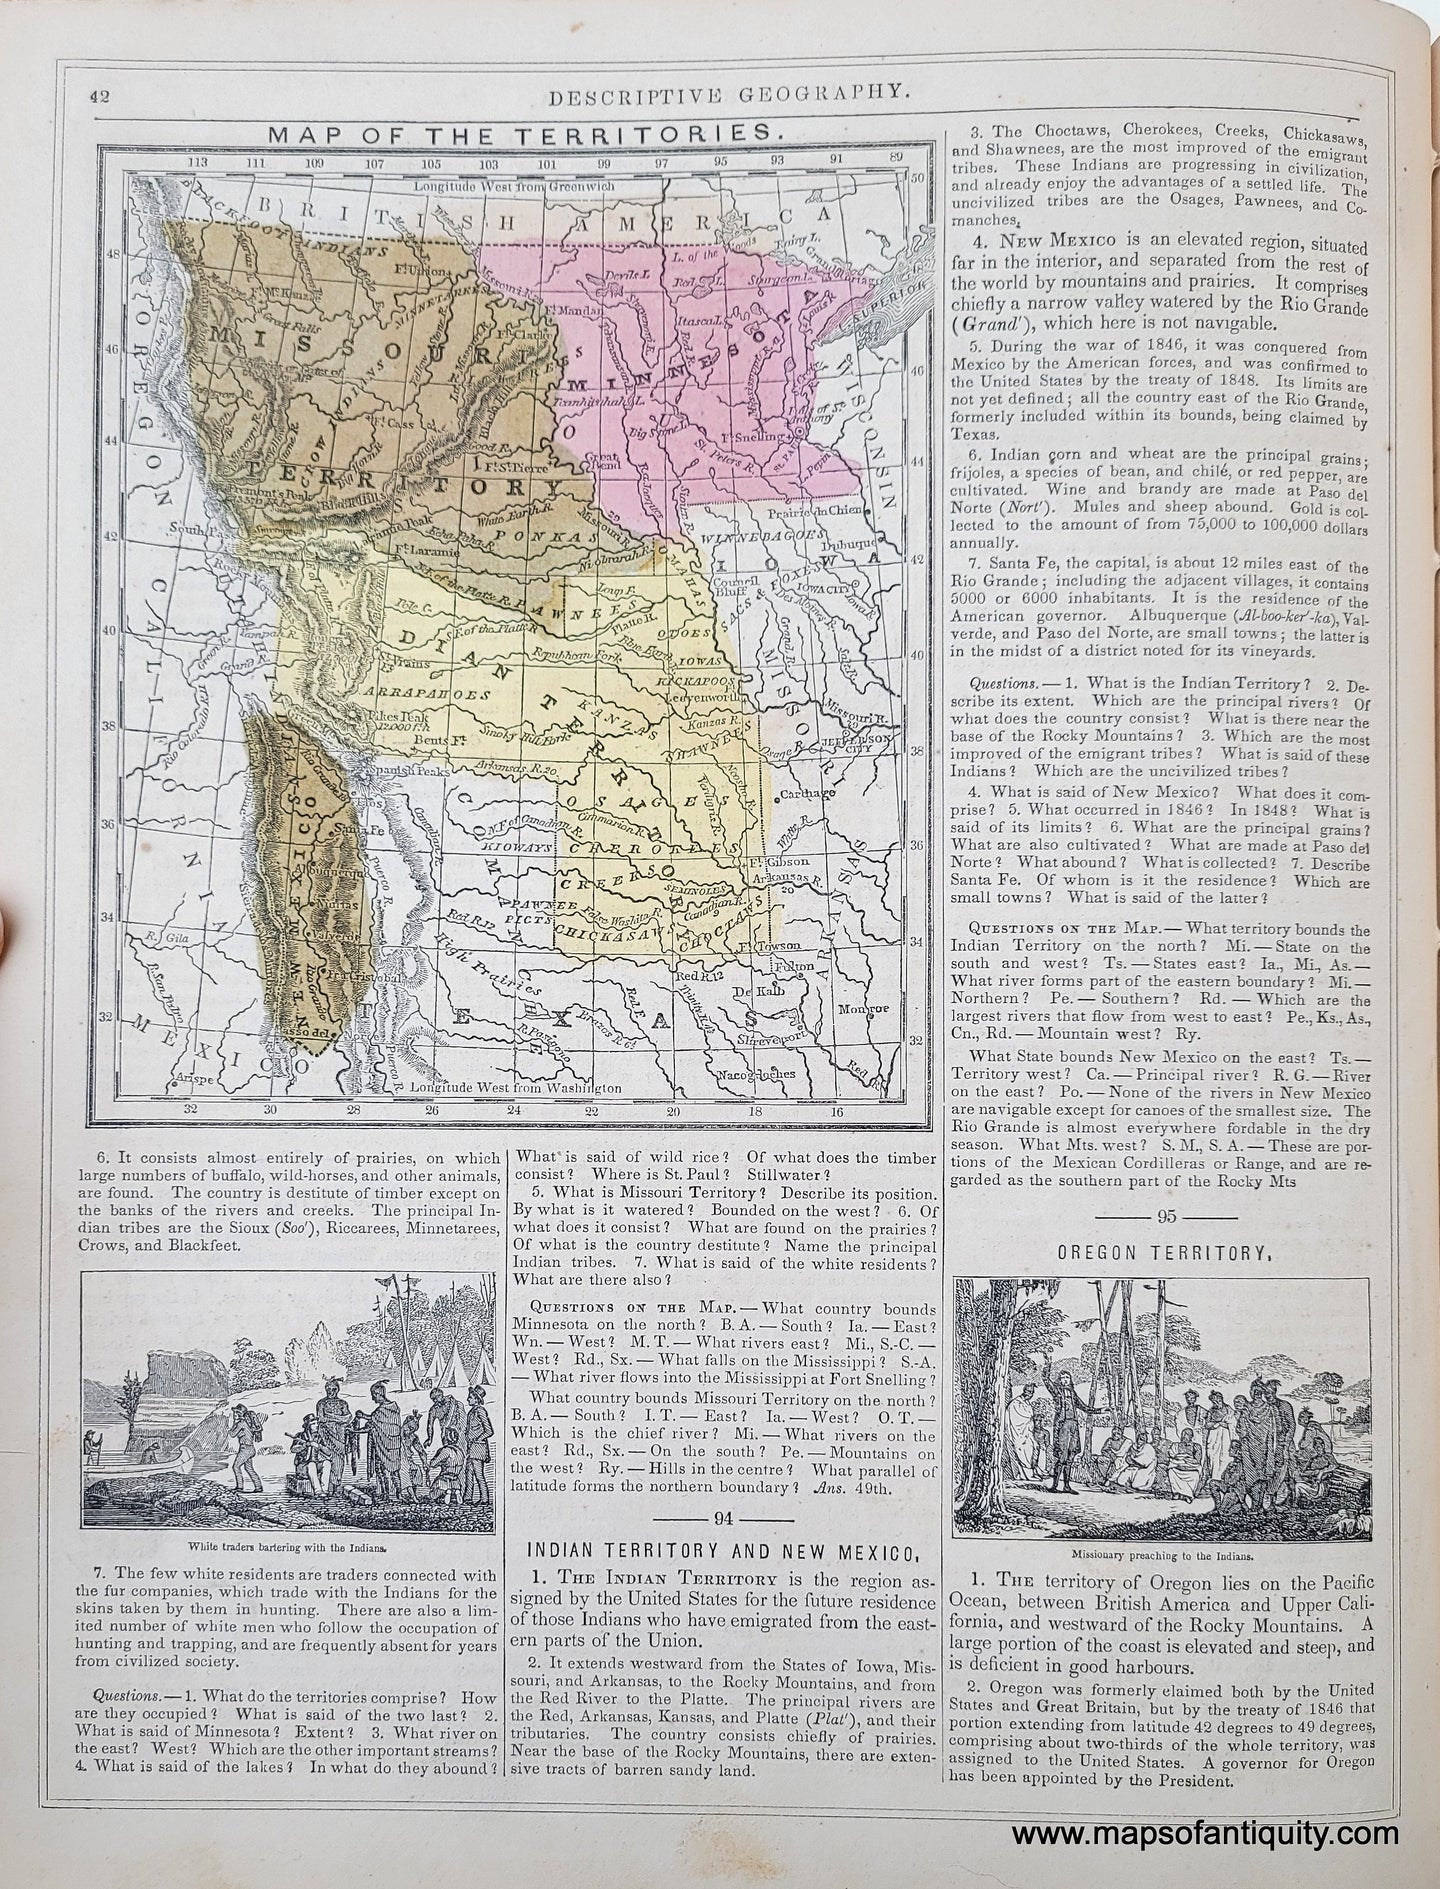 Genuine-Antique-Hand-Colored-Map-Map-of-the-Territories-Missouri-Territory-Minnesota-Territory-Indian-Territory-New-Mexico-Territory-1850-Mitchell-Thomas-Cowperthwait-Co--Maps-Of-Antiquity